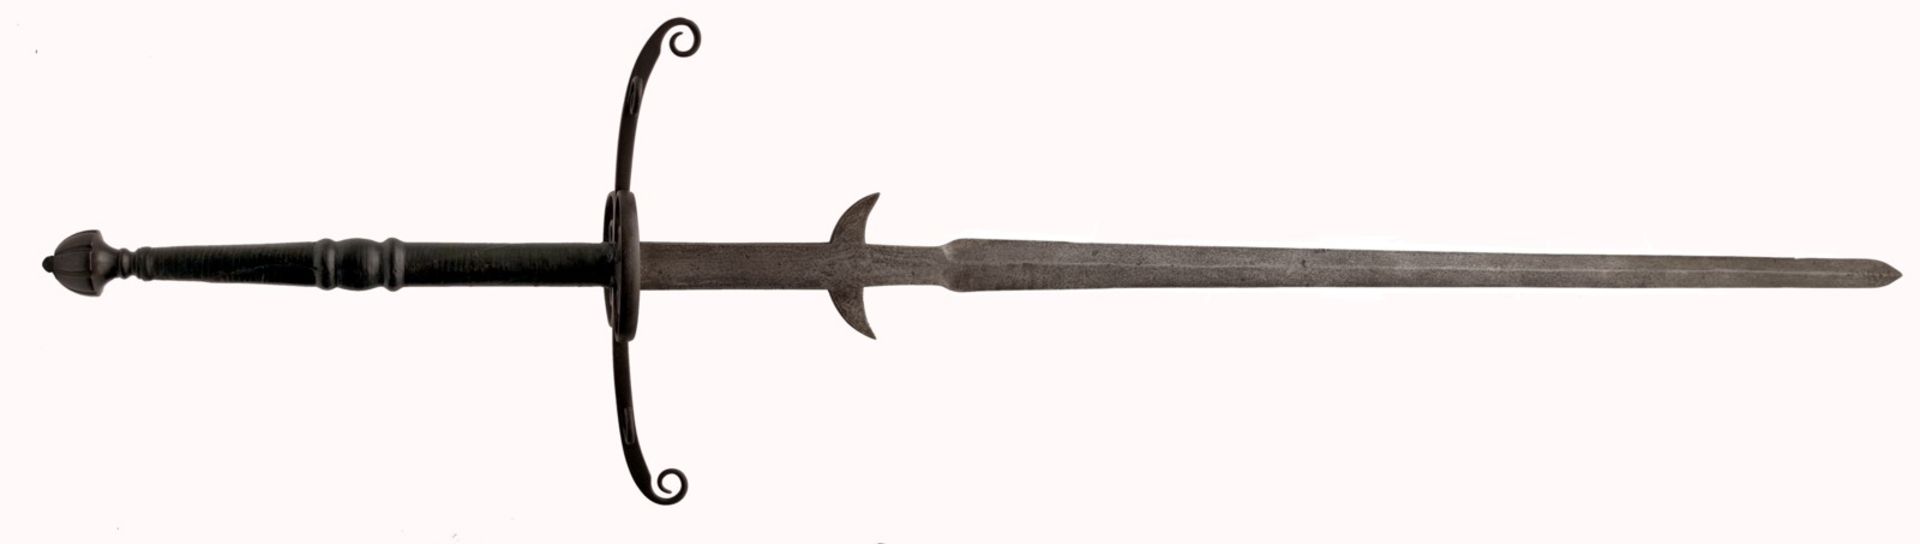 A Two-Hand Sword - Image 3 of 3